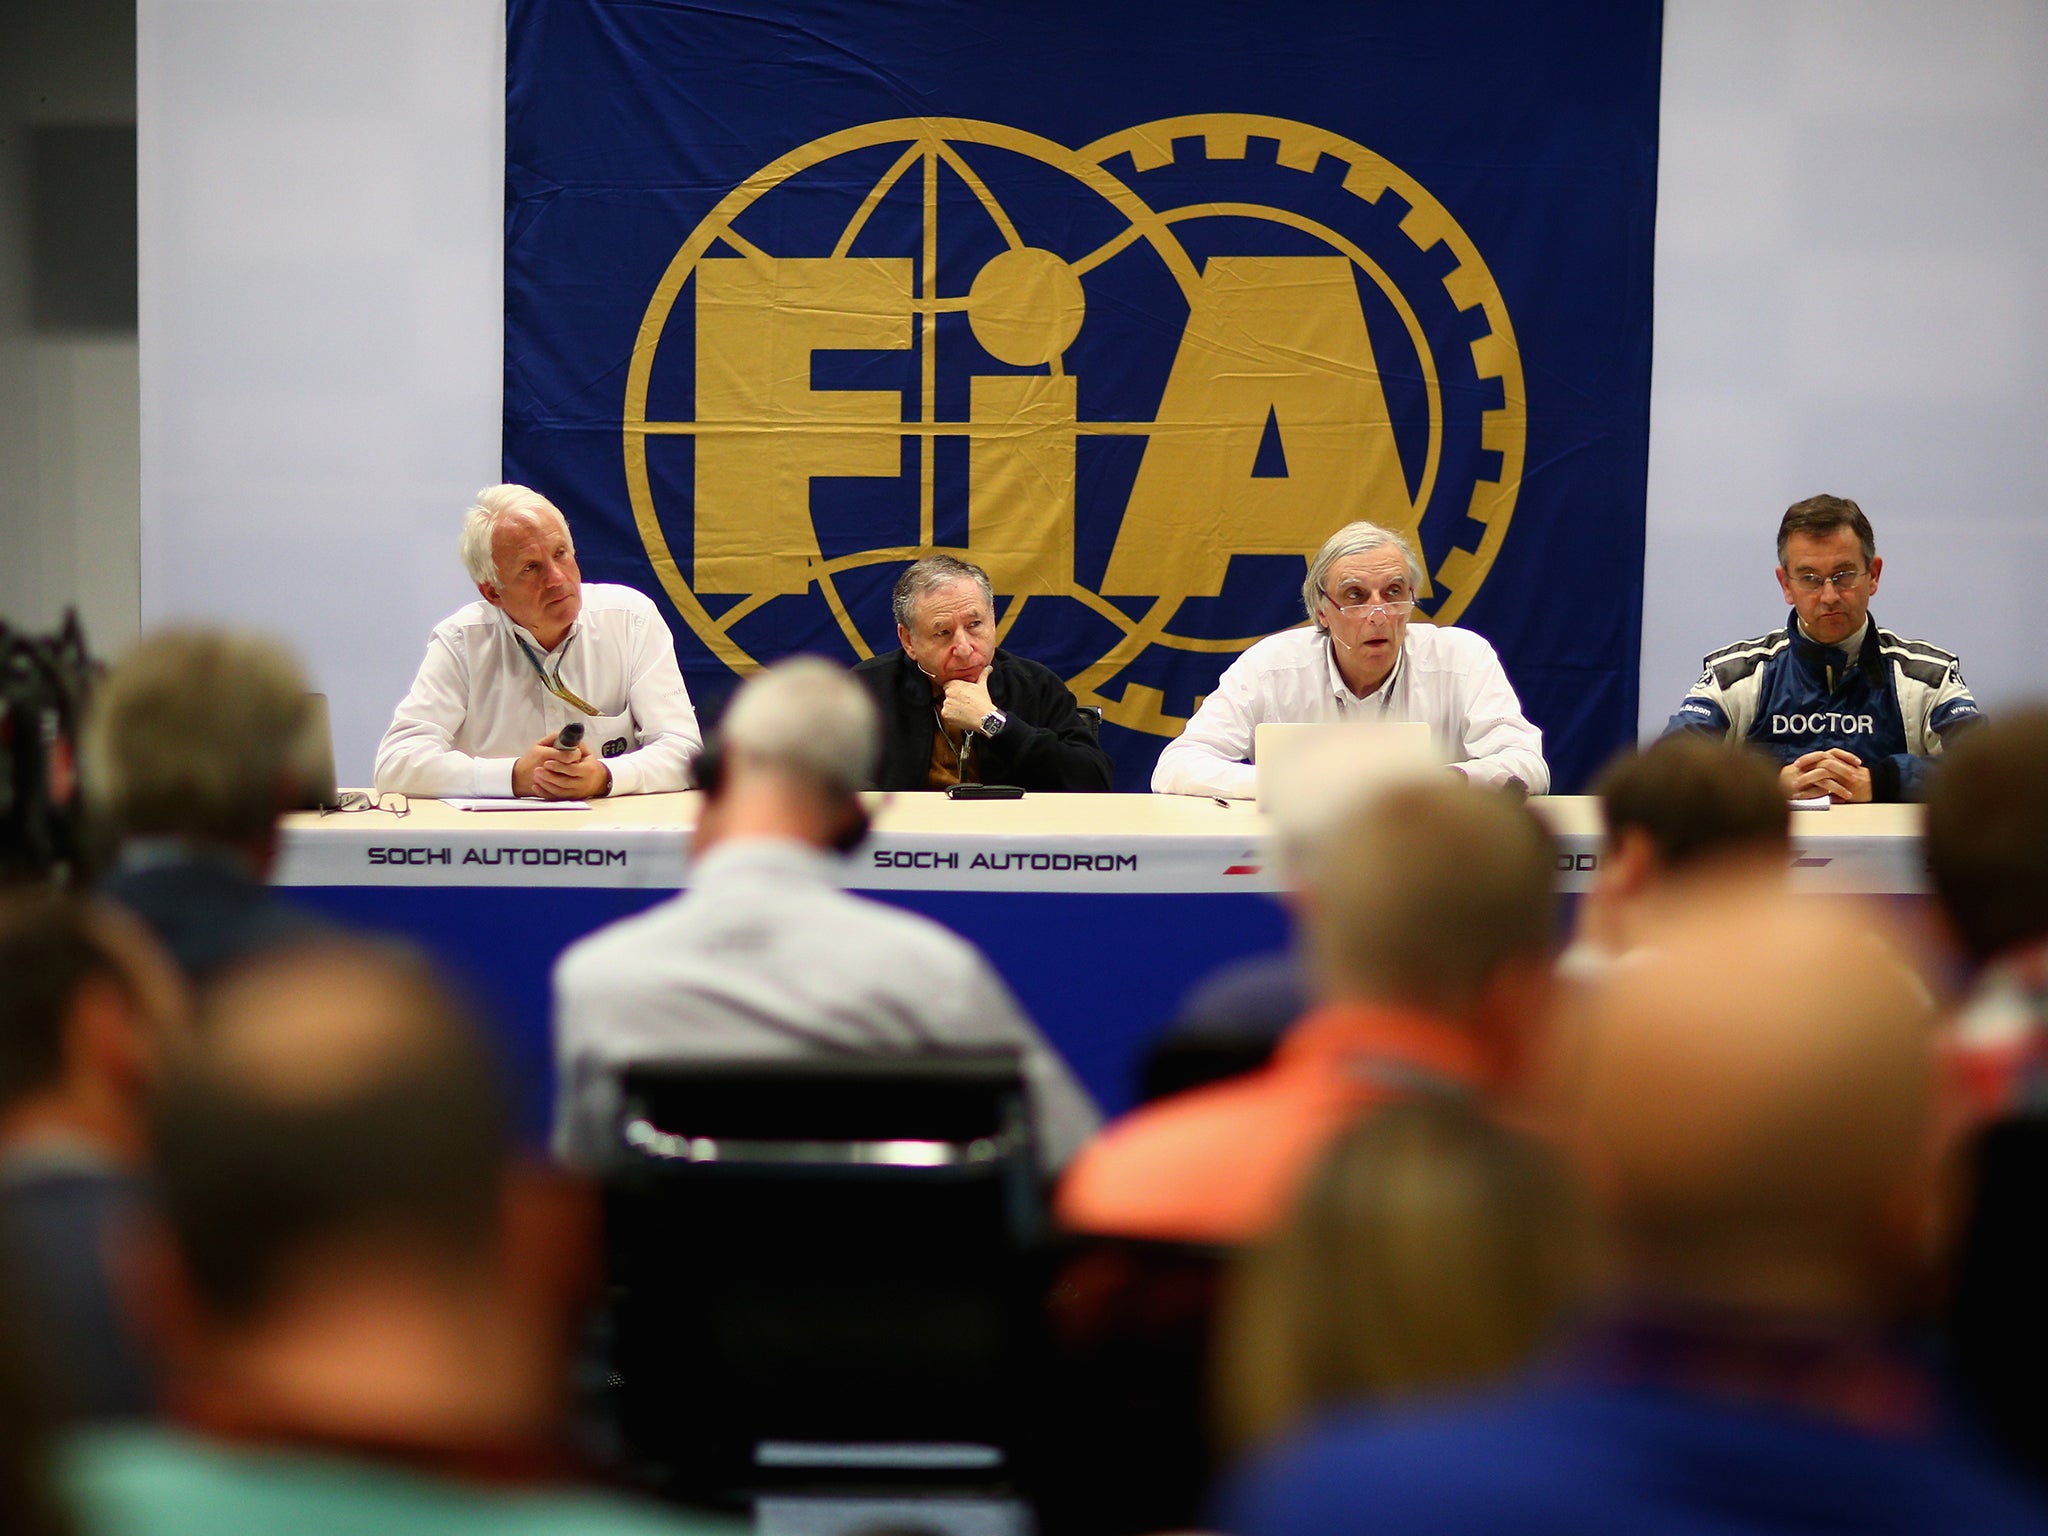 FIA Race Director Charlie Whiting, FIA President Jean Todt, Chief Medical Officer Jean-Charles Piette and Medical Rescue Co-ordinator Ian Roberts attend a FIA press conference following the Jules Bianchi crash